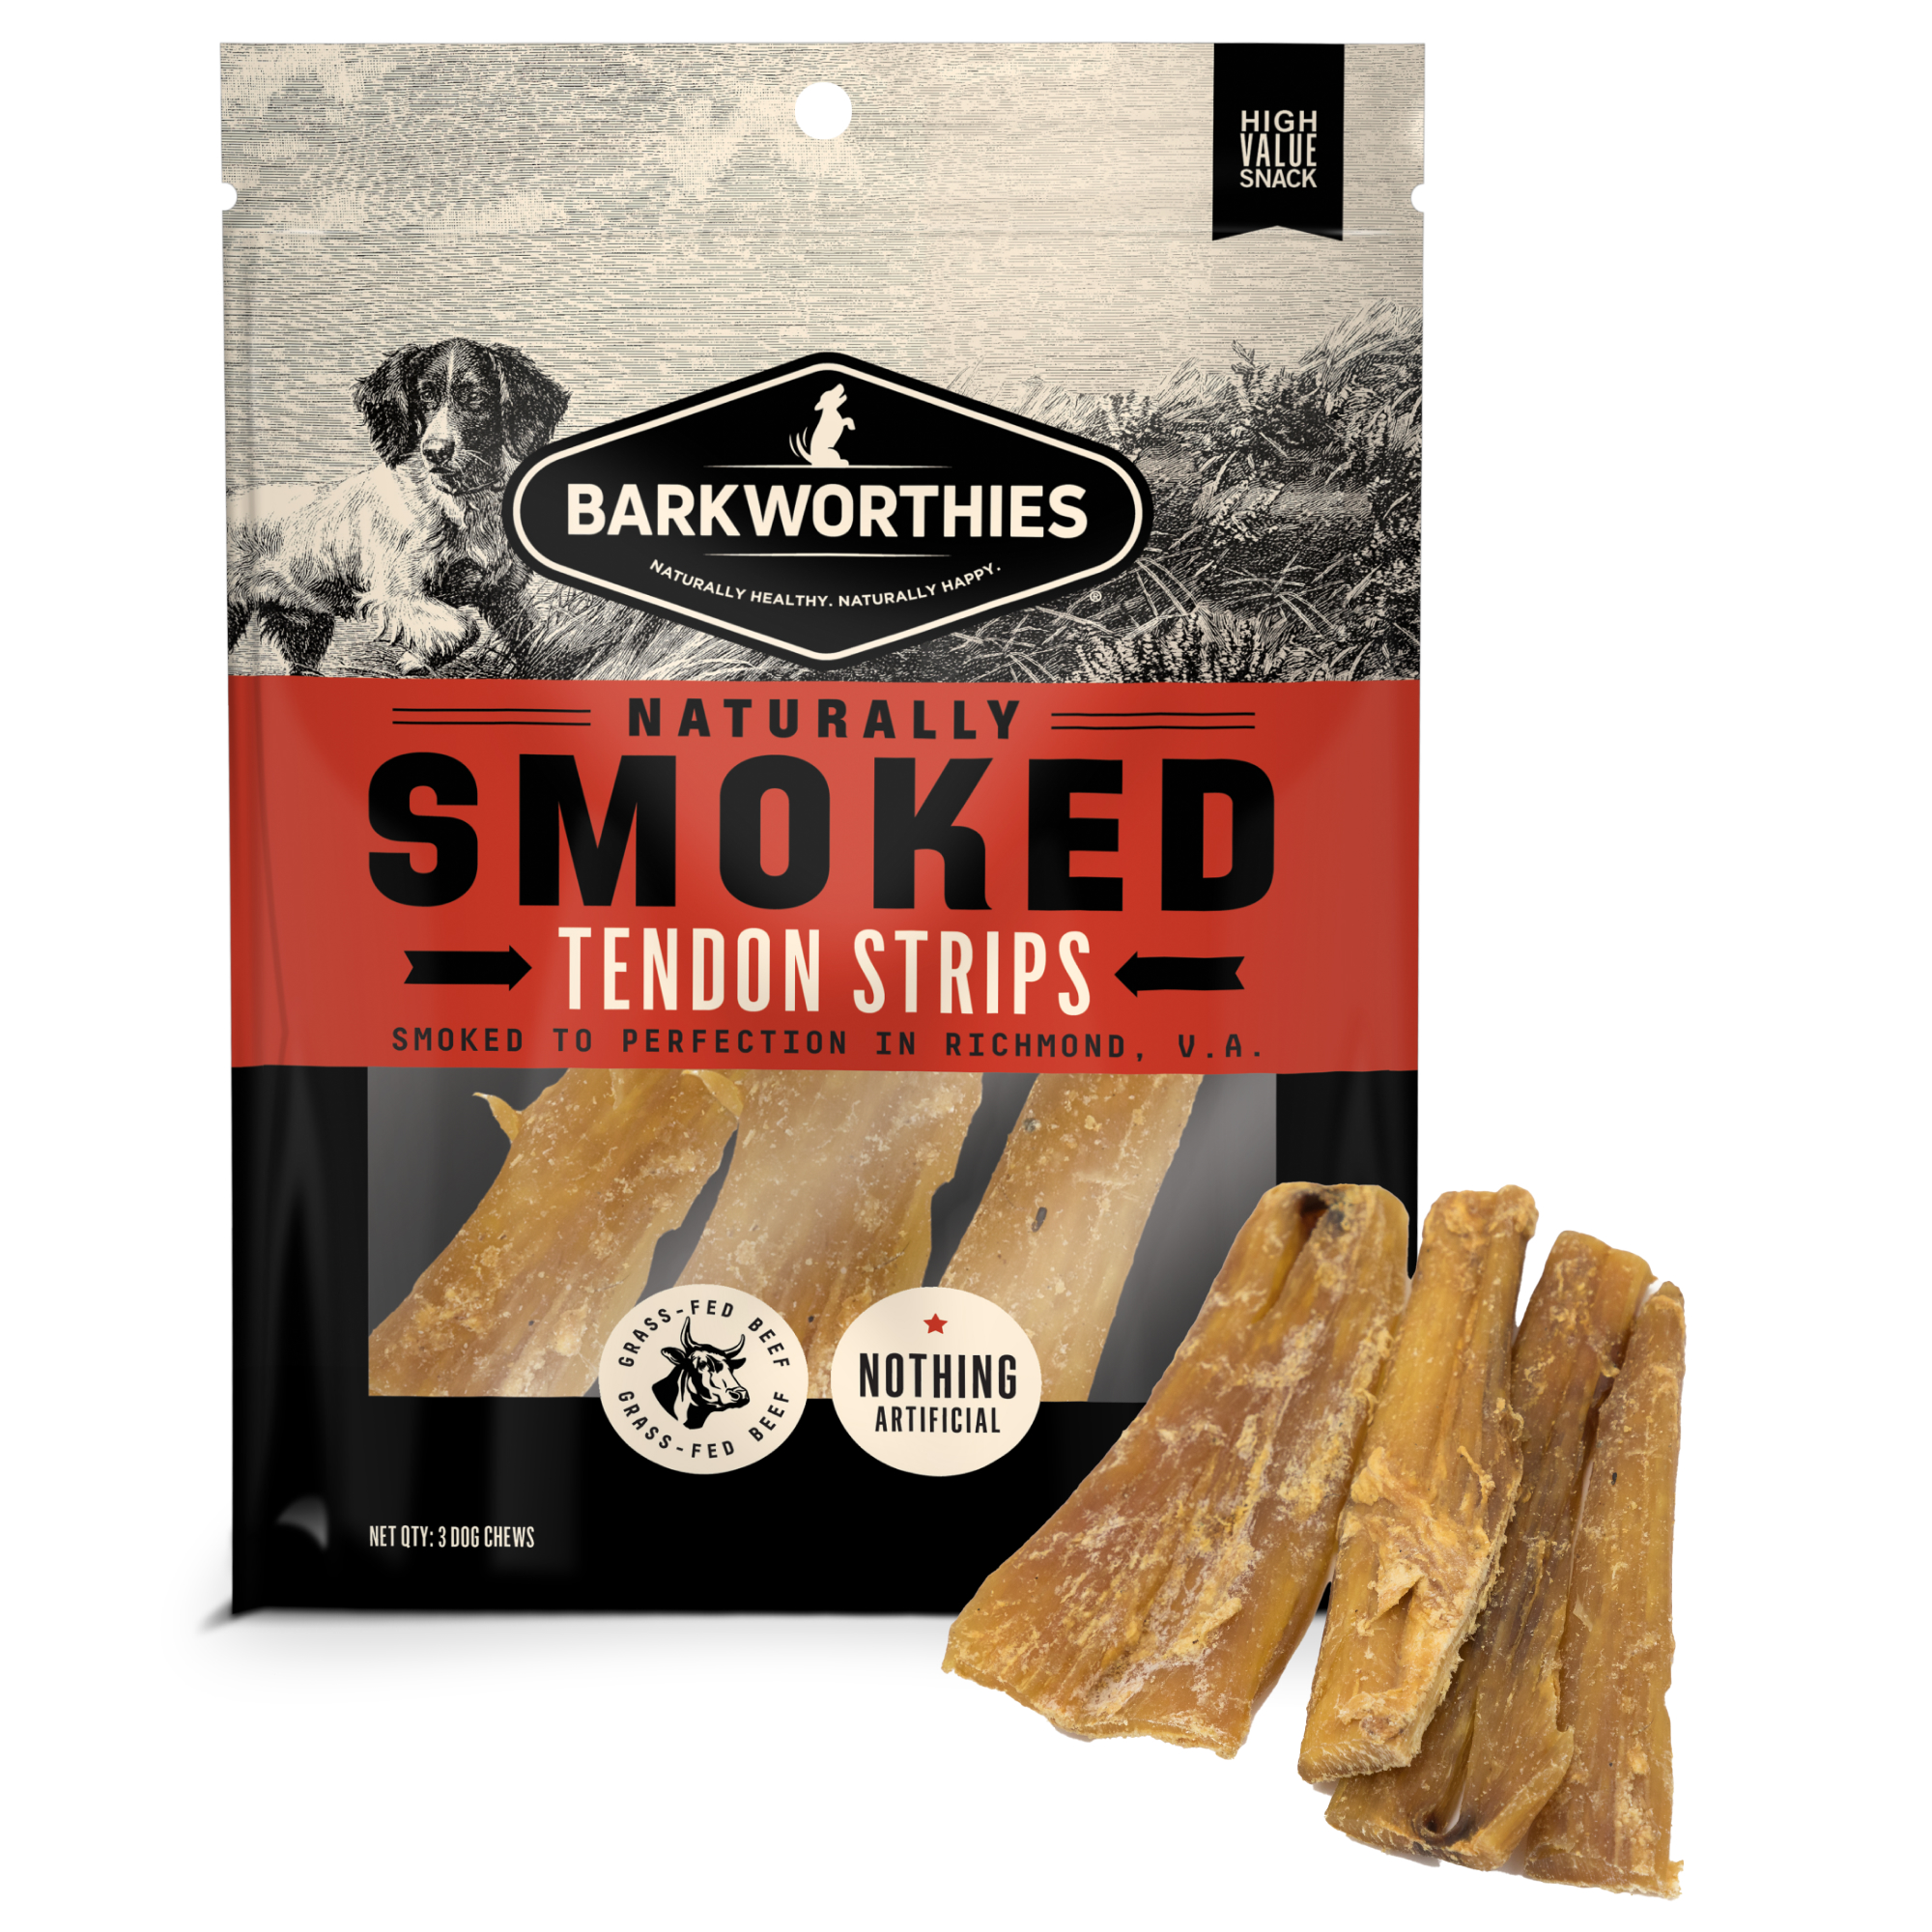 Tendon Strips Product Image